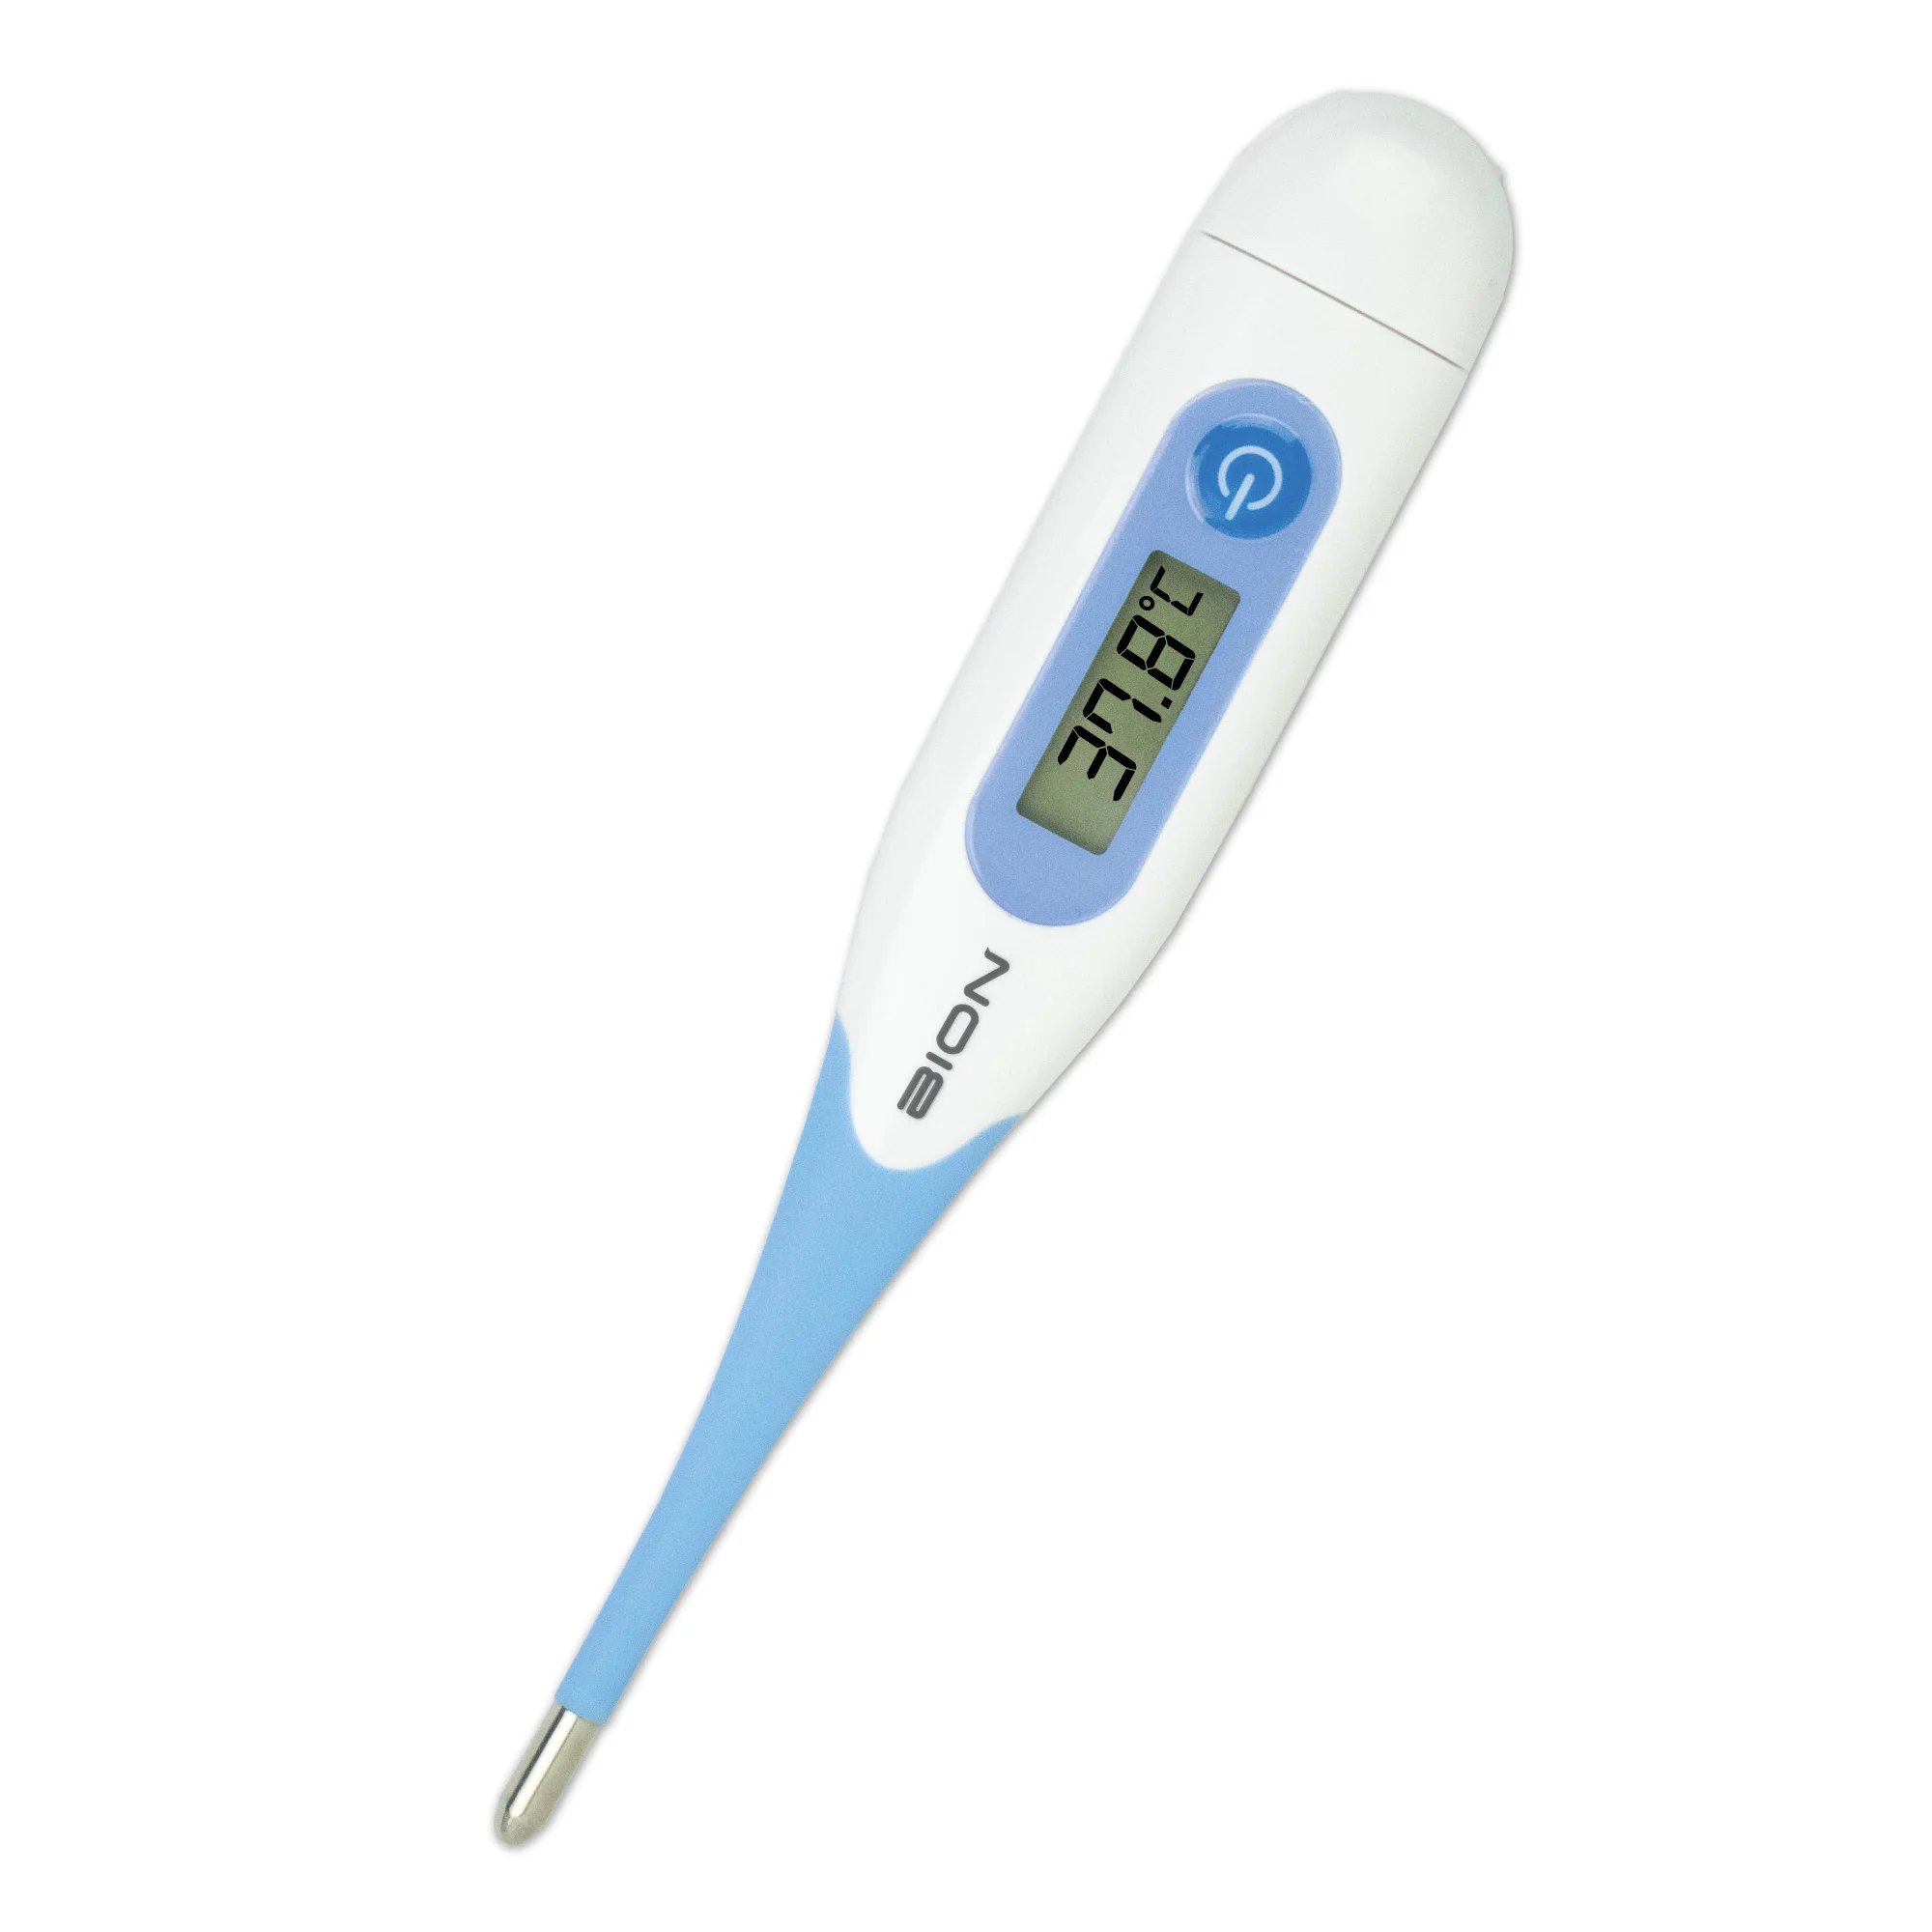 BION Digital Oral Clinical Thermometer LB100 Singapore Brand Fever Waterproof Home Use Fast Reading Water Resistance